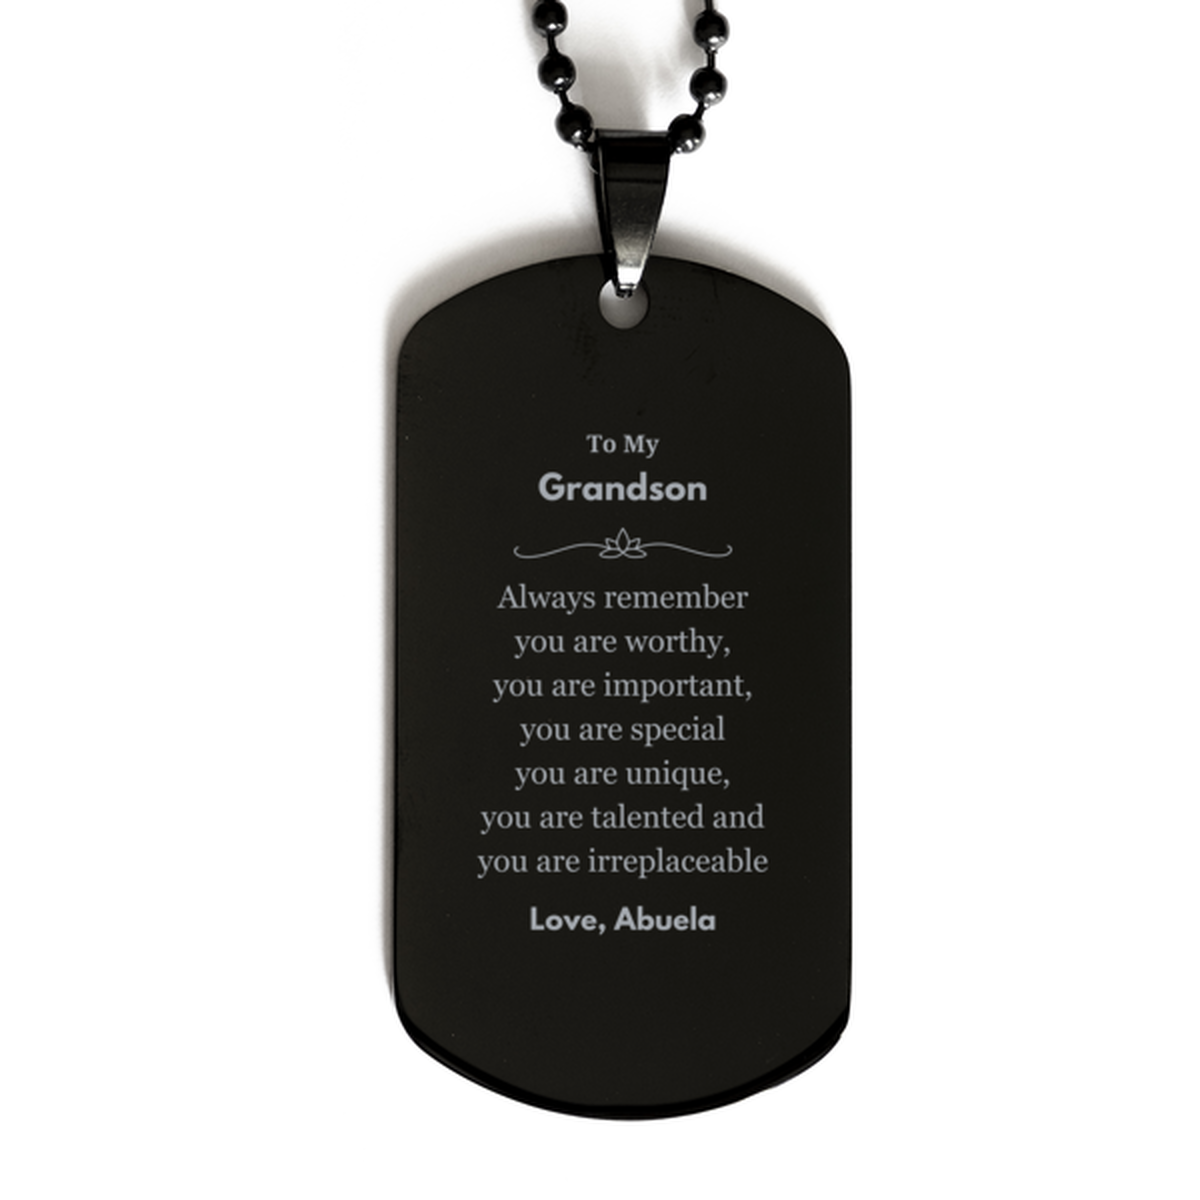 Grandson Birthday Gifts from Abuela, Inspirational Black Dog Tag for Grandson Christmas Graduation Gifts for Grandson Always remember you are worthy, you are important. Love, Abuela